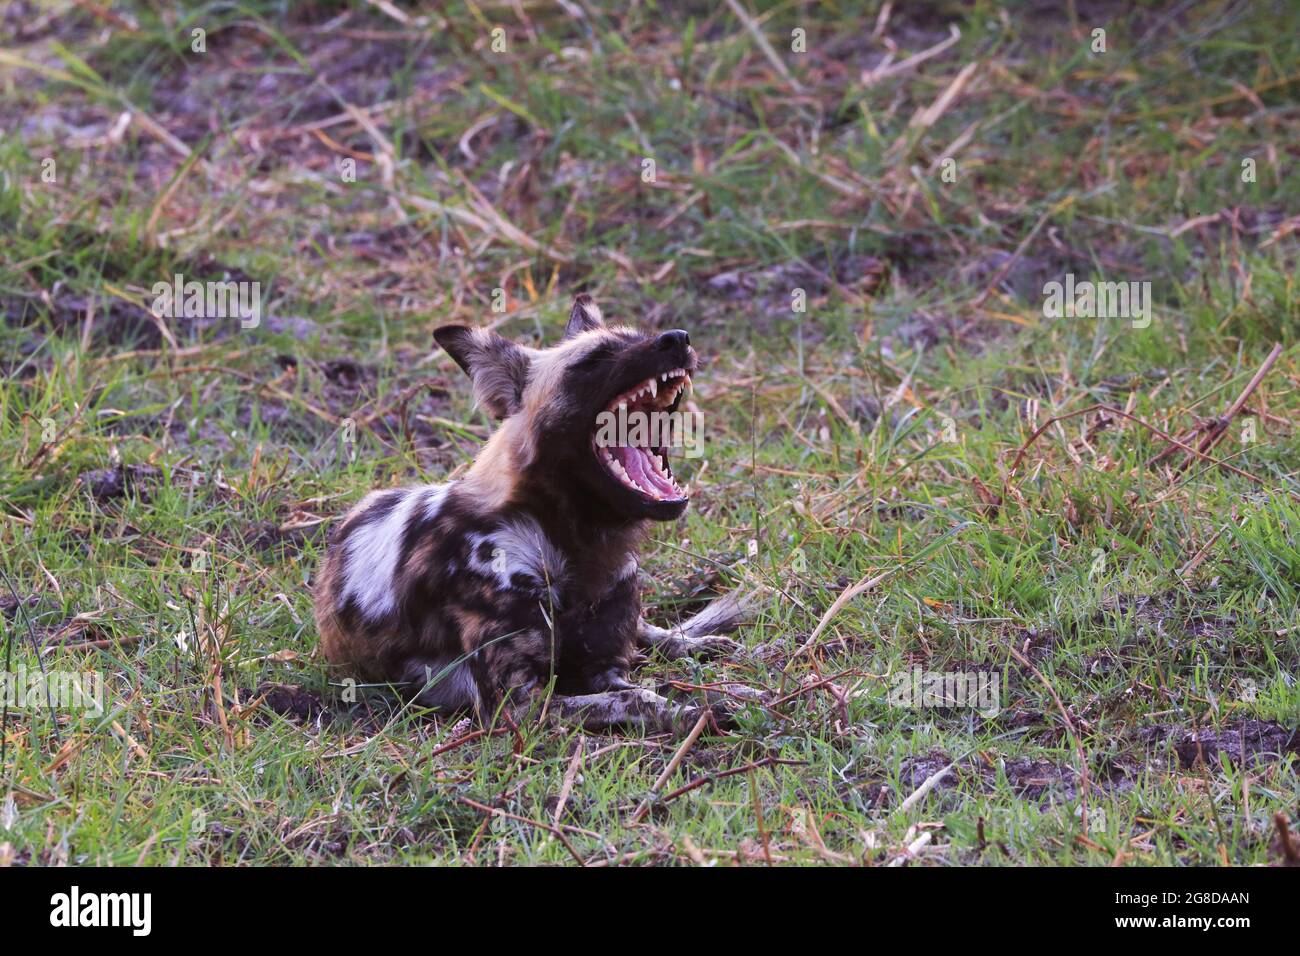 An African wild dog displays its large teeth while resting prior to a hunt in the Moremi Game Reserve, Okavango Delta, Botswana, Africa. Stock Photo